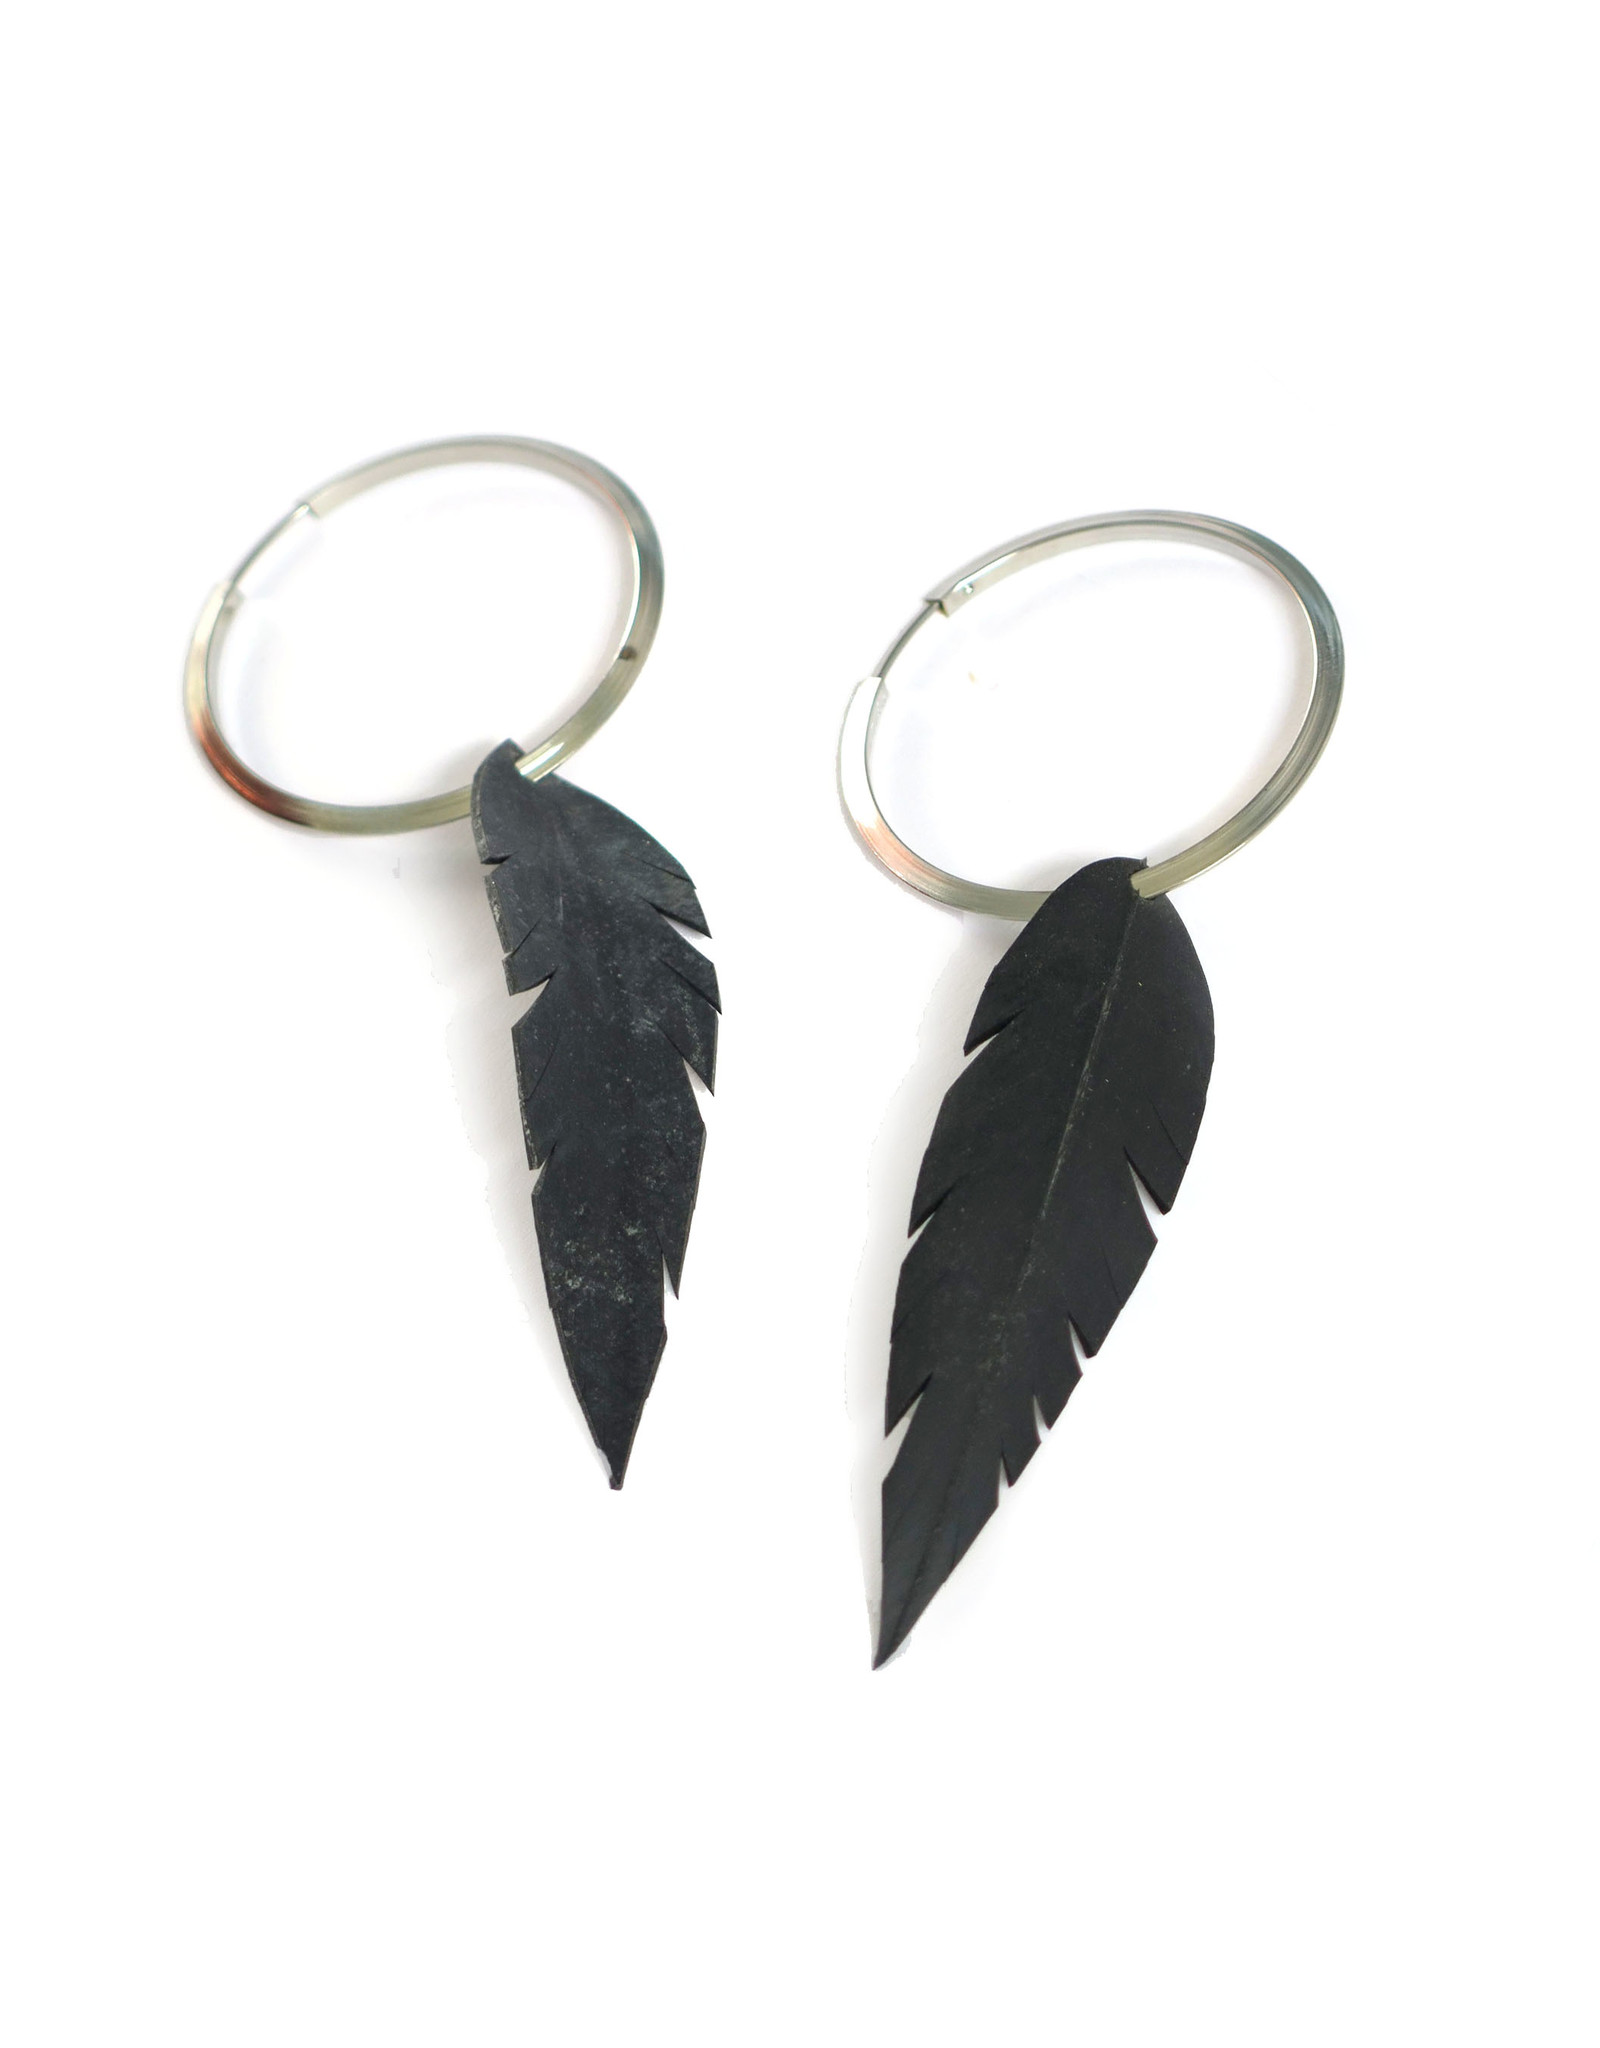 True Partners in Craft Large Feathers on Silver Hoops by True Partners in Craft